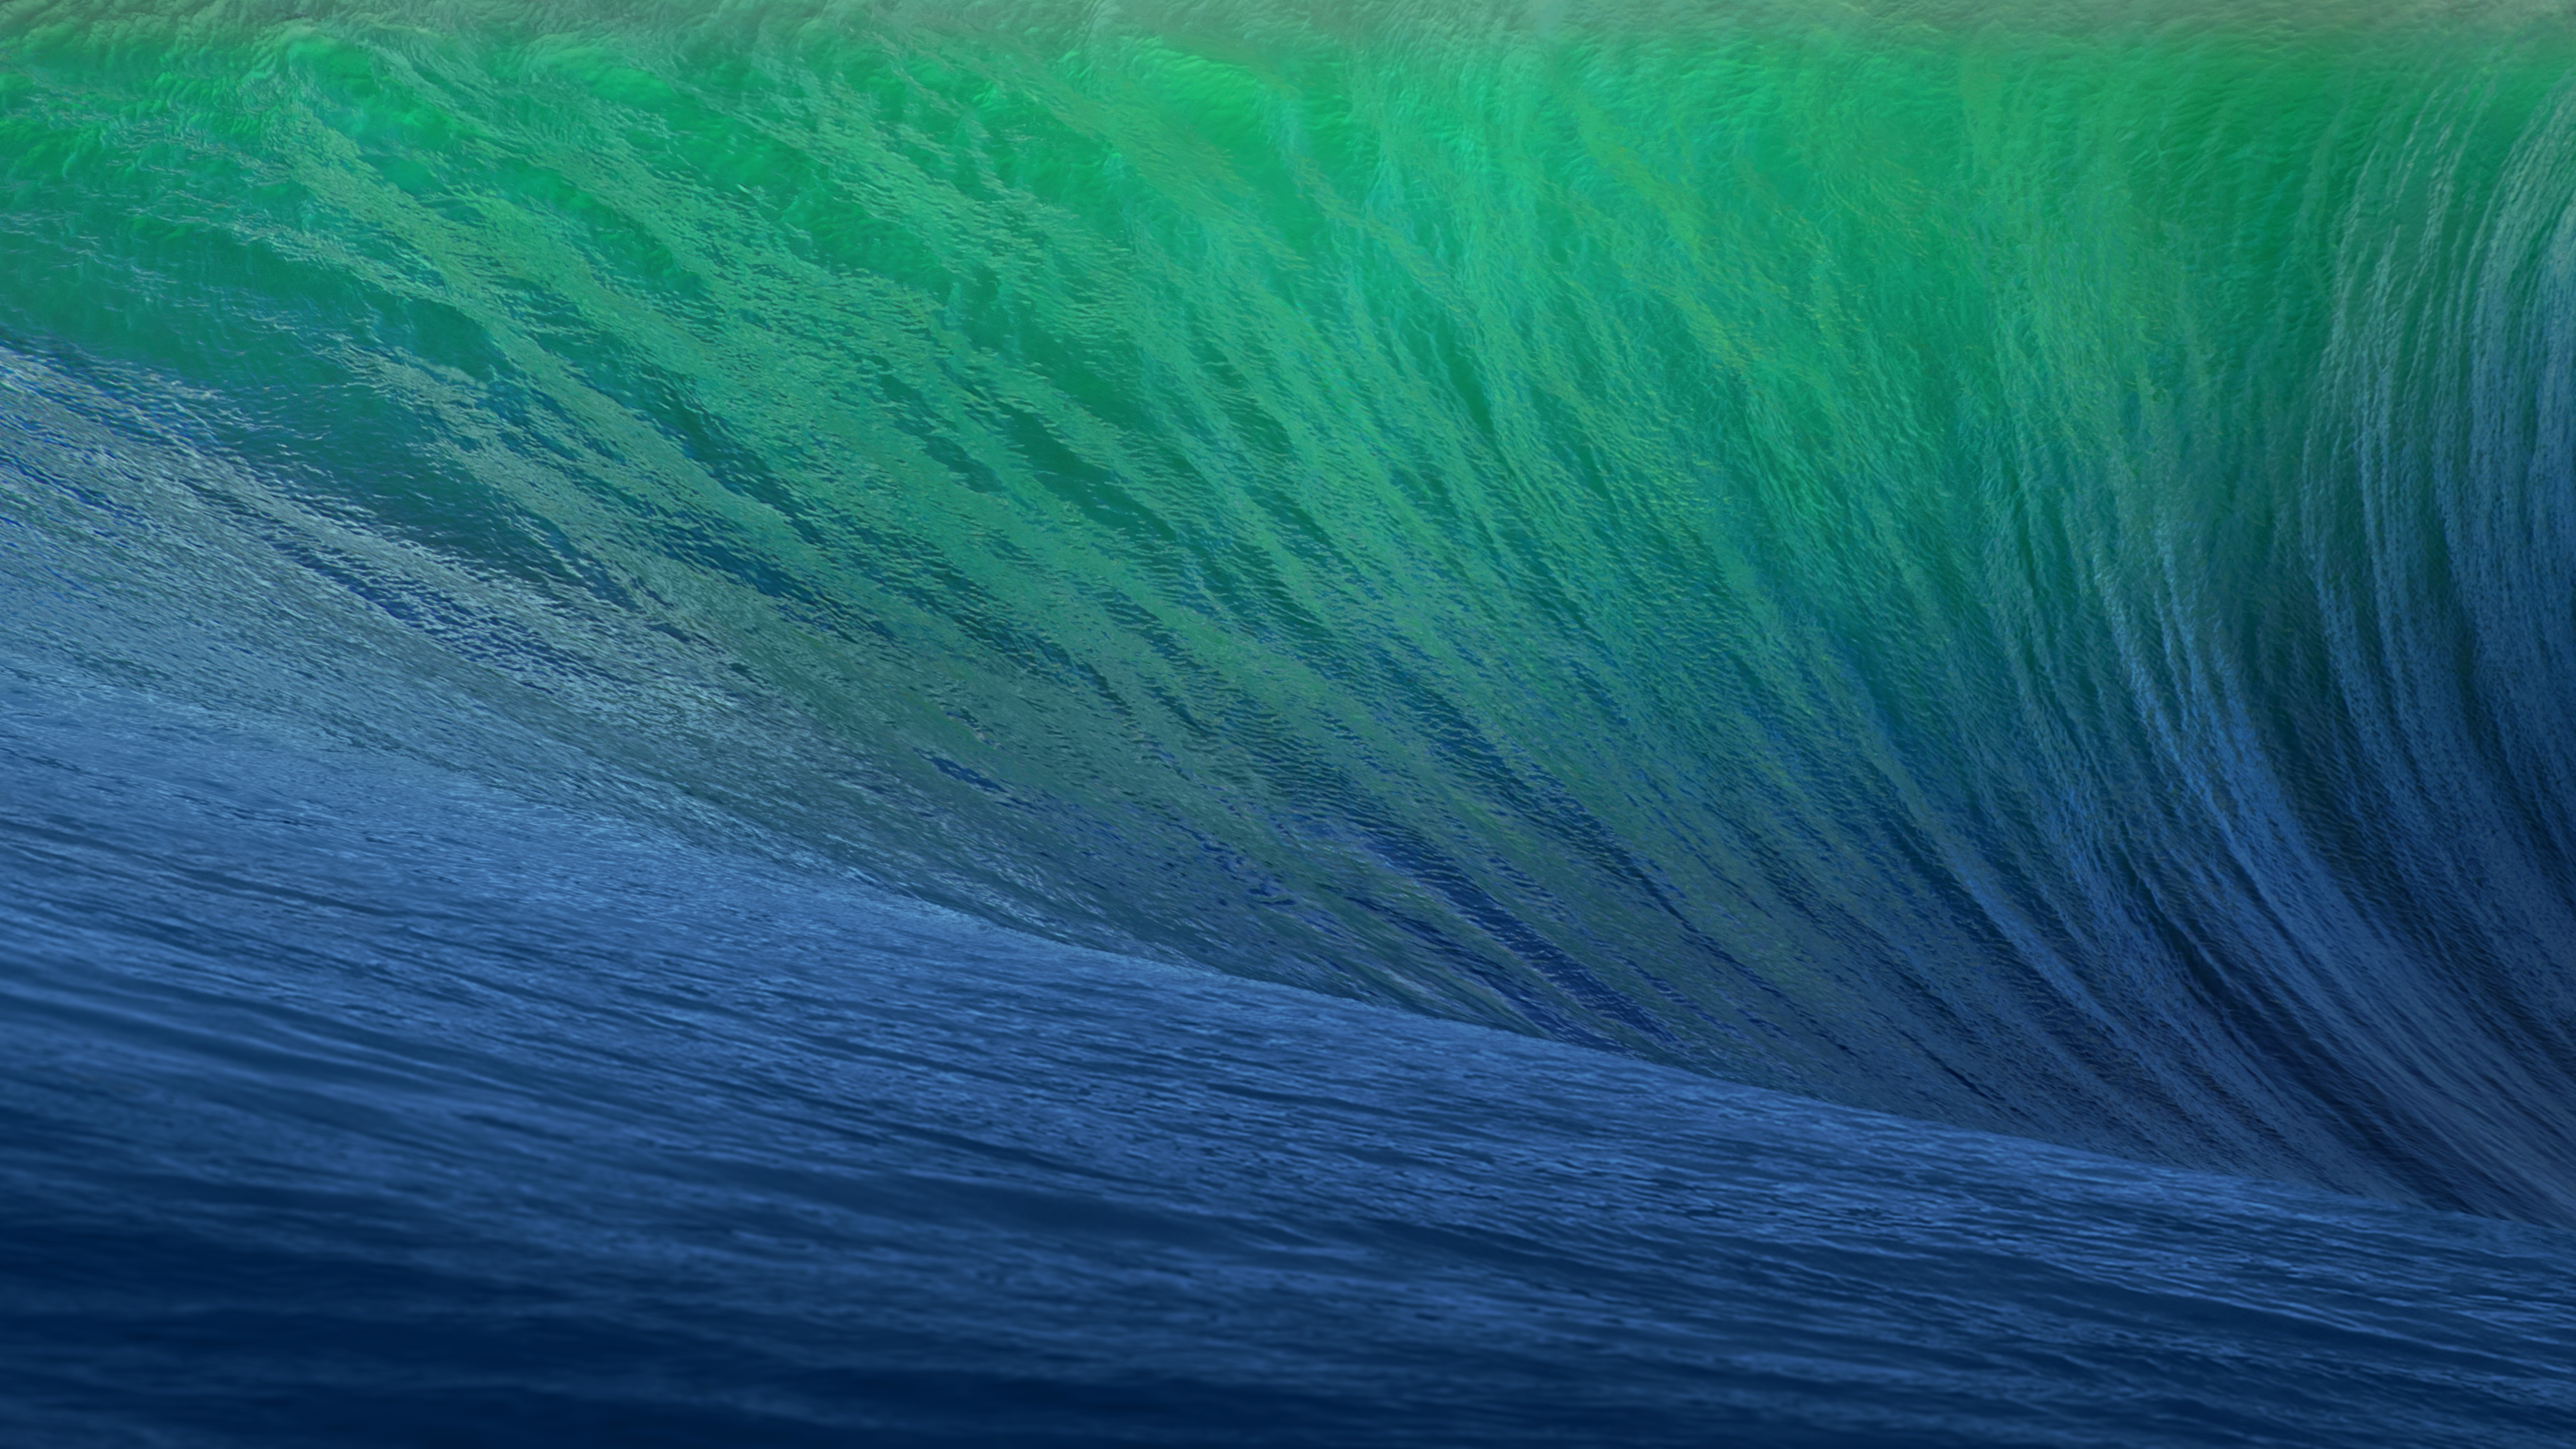 Want A Taste Of Os X Mavericks Before It Launches Later This Year